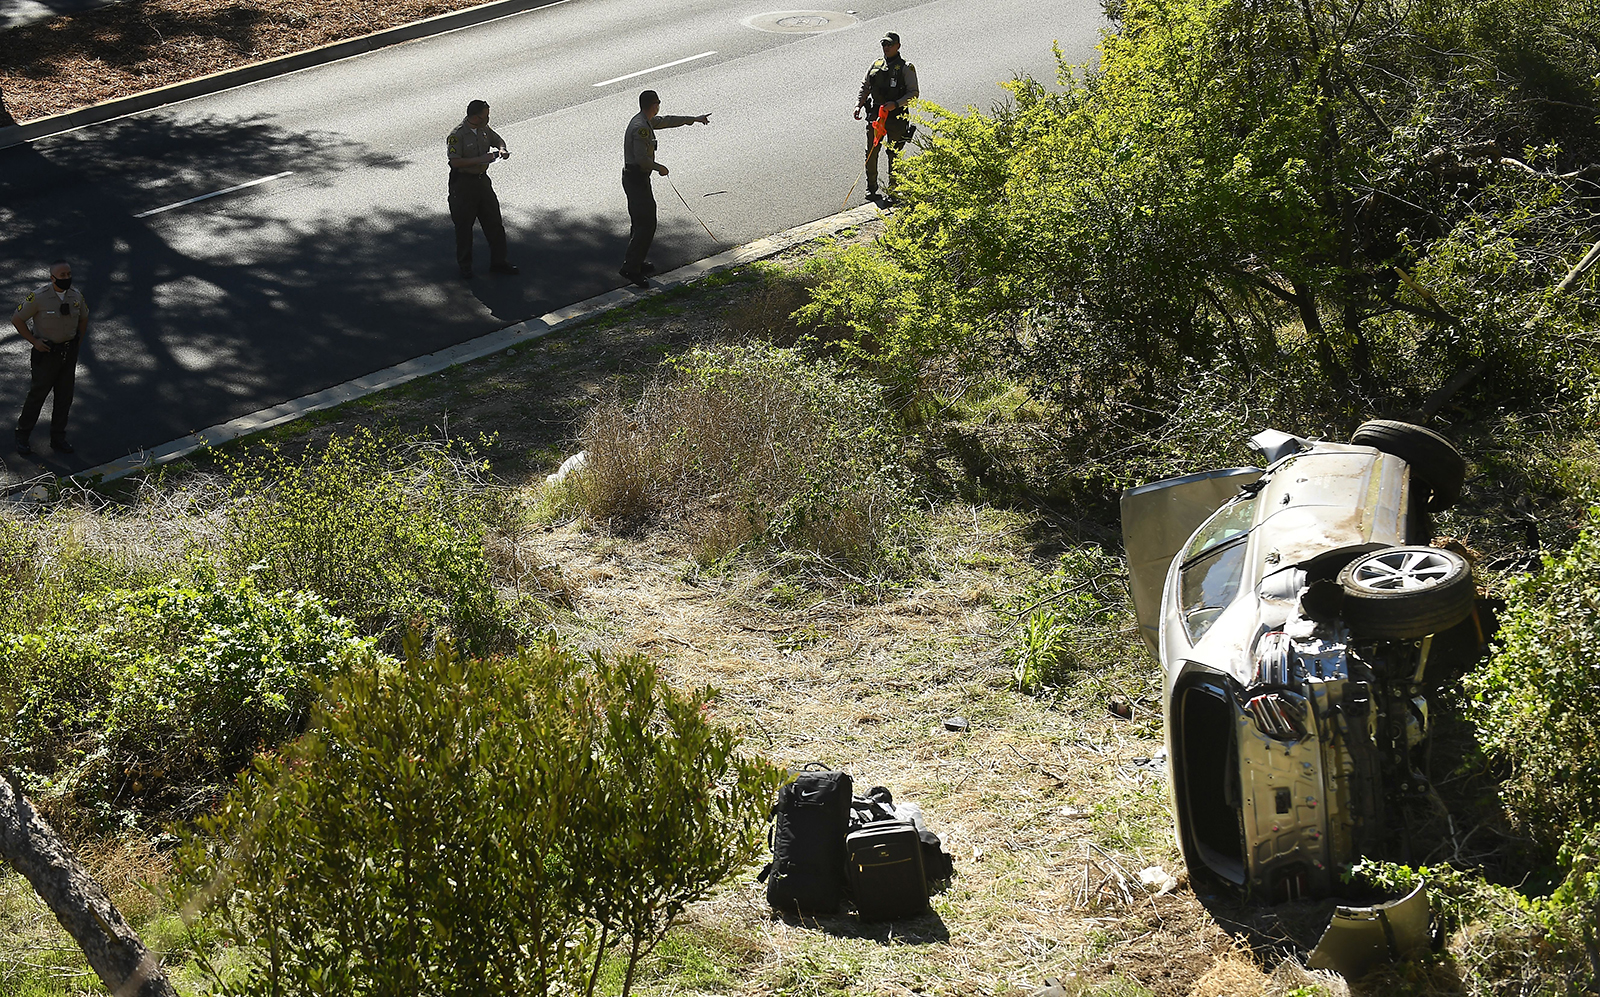 L.A. County Sheriff's officers investigate an accident involving famous golfer Tiger Woods along Hawthorne Blvd. in Ranch Palos Verdes on Tuesday.